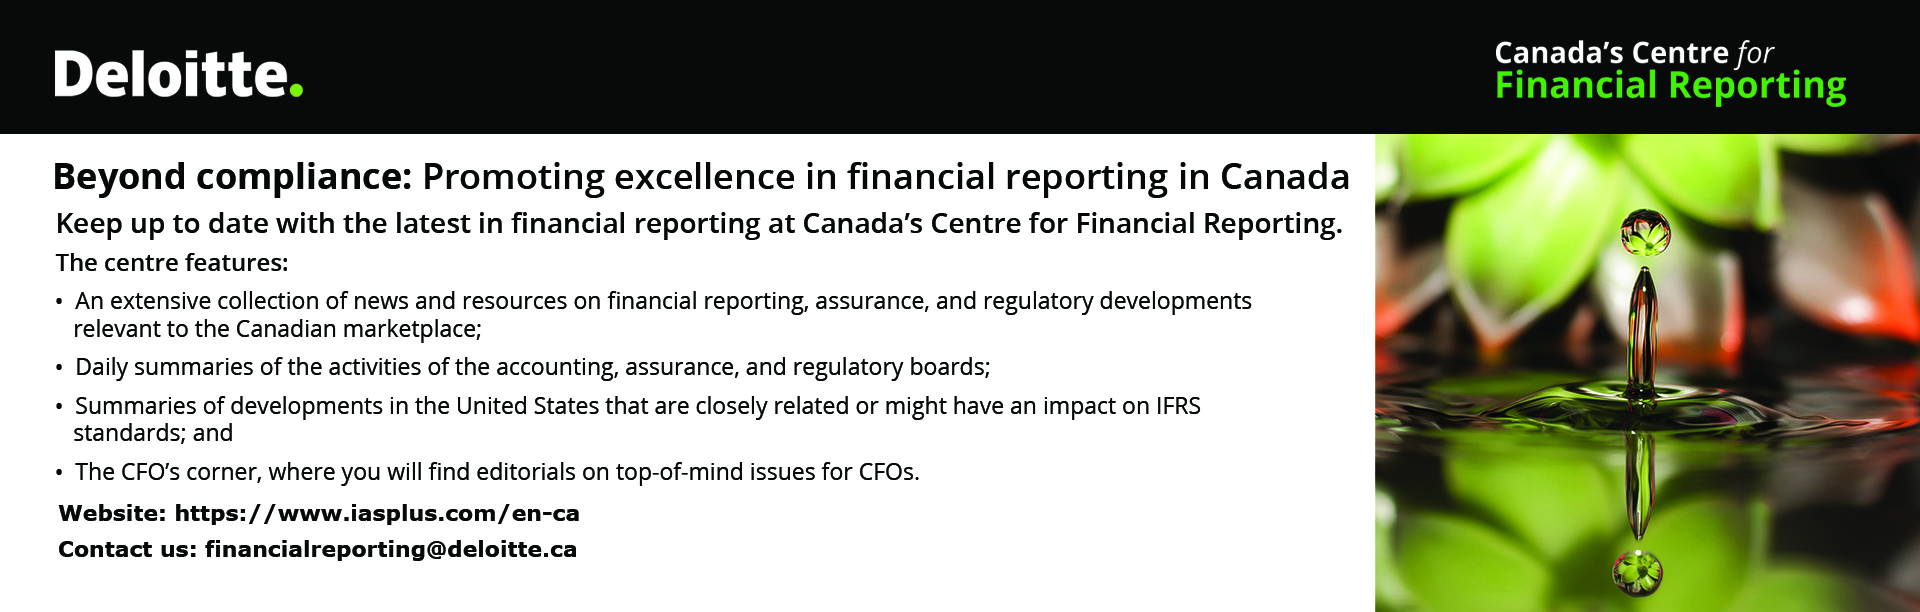 Deloitte - Beyond compliance: Promoting excellence in financial reporting in Canada